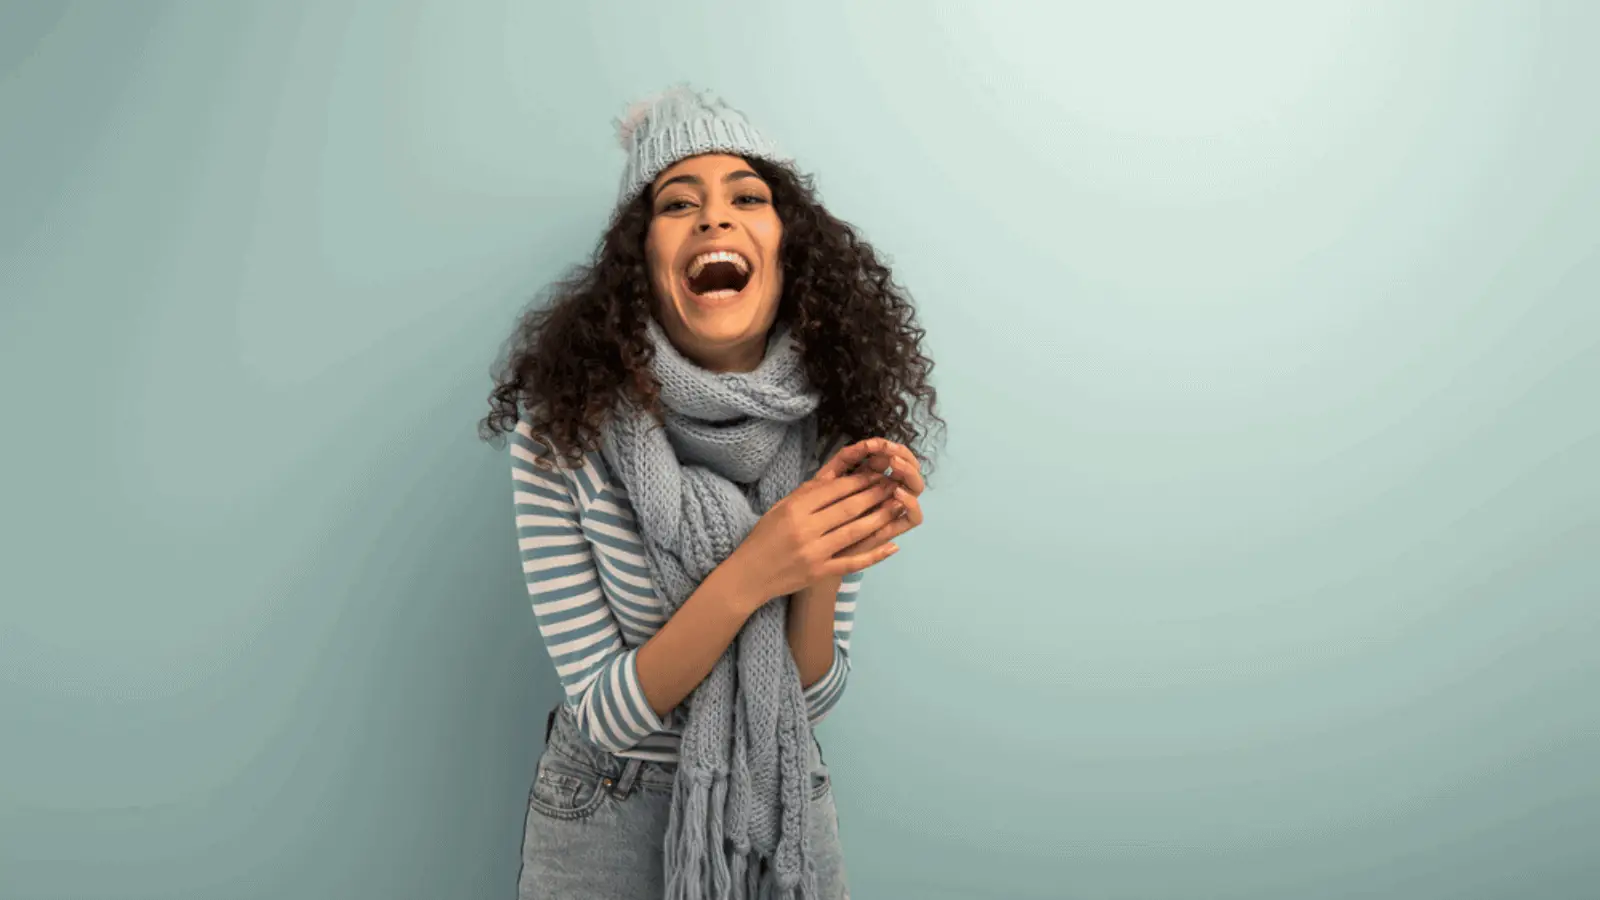 woman laughing winter hat and sweater blue